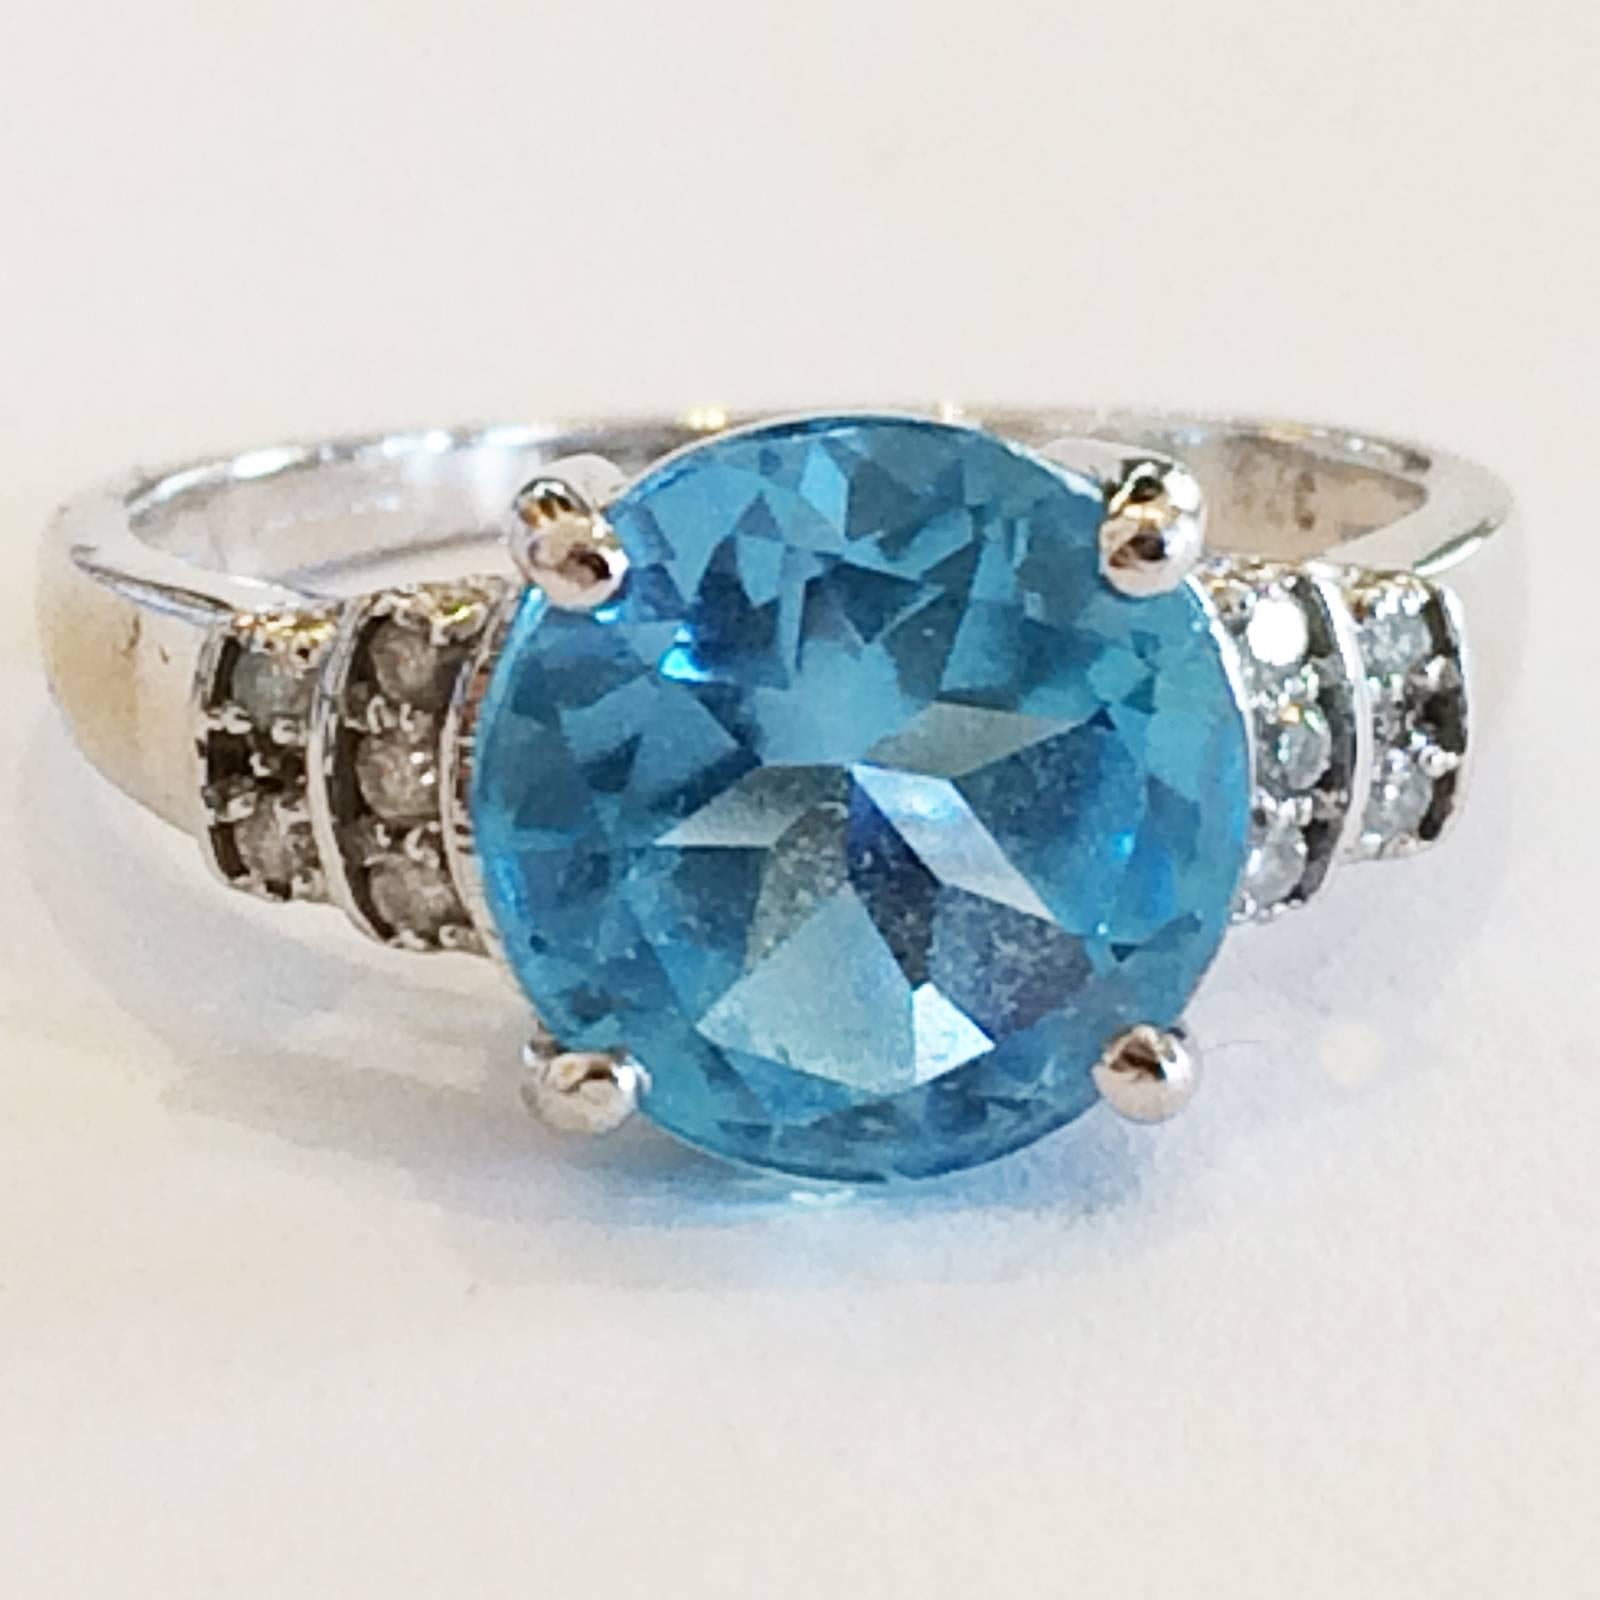 Mid Century Ring of 9Kt White Gold, with a large, Brilliant Blue Topaz Gem, featured with 5 small Diamonds to each stepped shoulder. Intricately facetted Topaz, high mounted to get light in from below to show the colour even more sparkle. Full